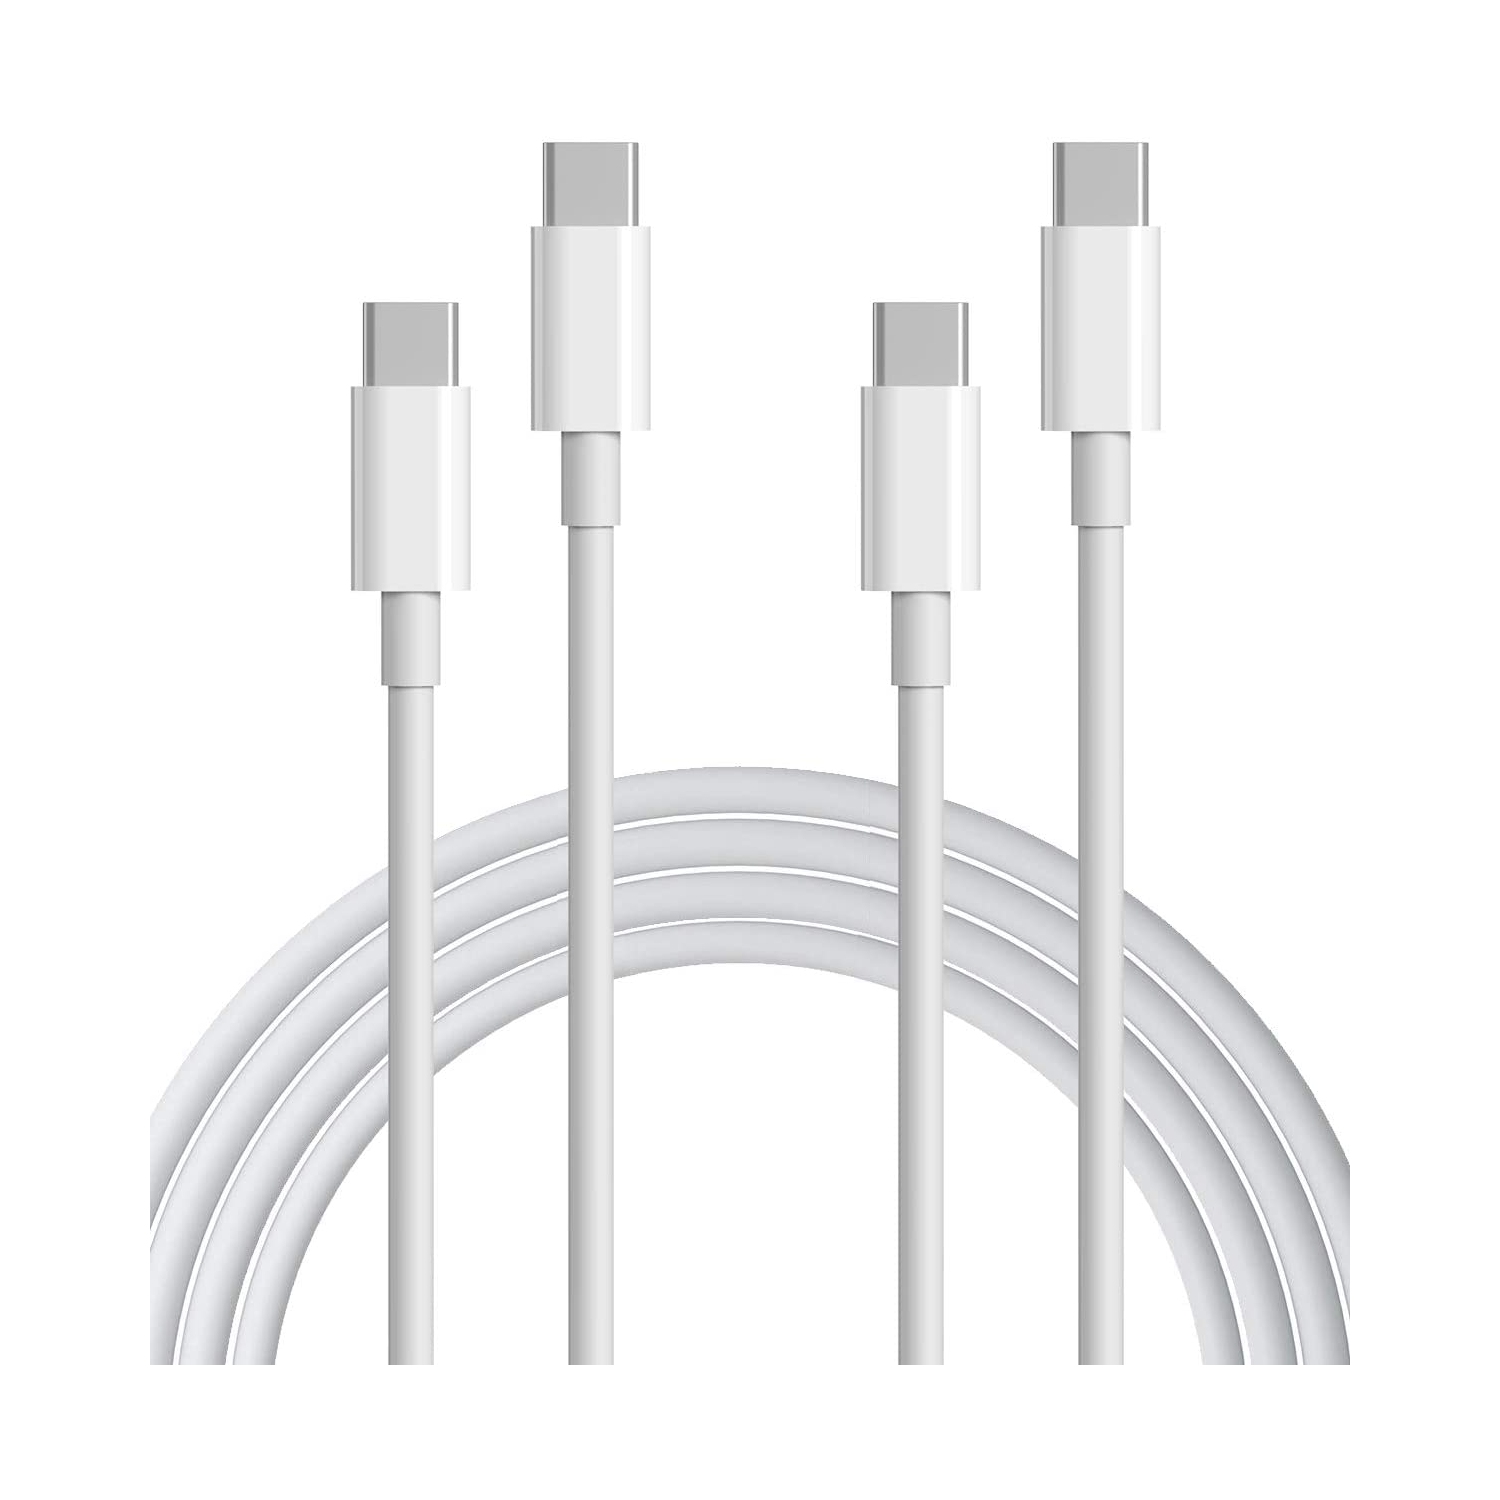 Cableshark USB C to USB C Charge Cable,(3Pack 3.3ft) 3A Type C Fast Charging Cable Data Sync Cord Compatible for MacBook Pro 2018/2017,MacBook Air/iPad Pro 2018,MacBook 12'',Huawei Google Pixel 2/3/